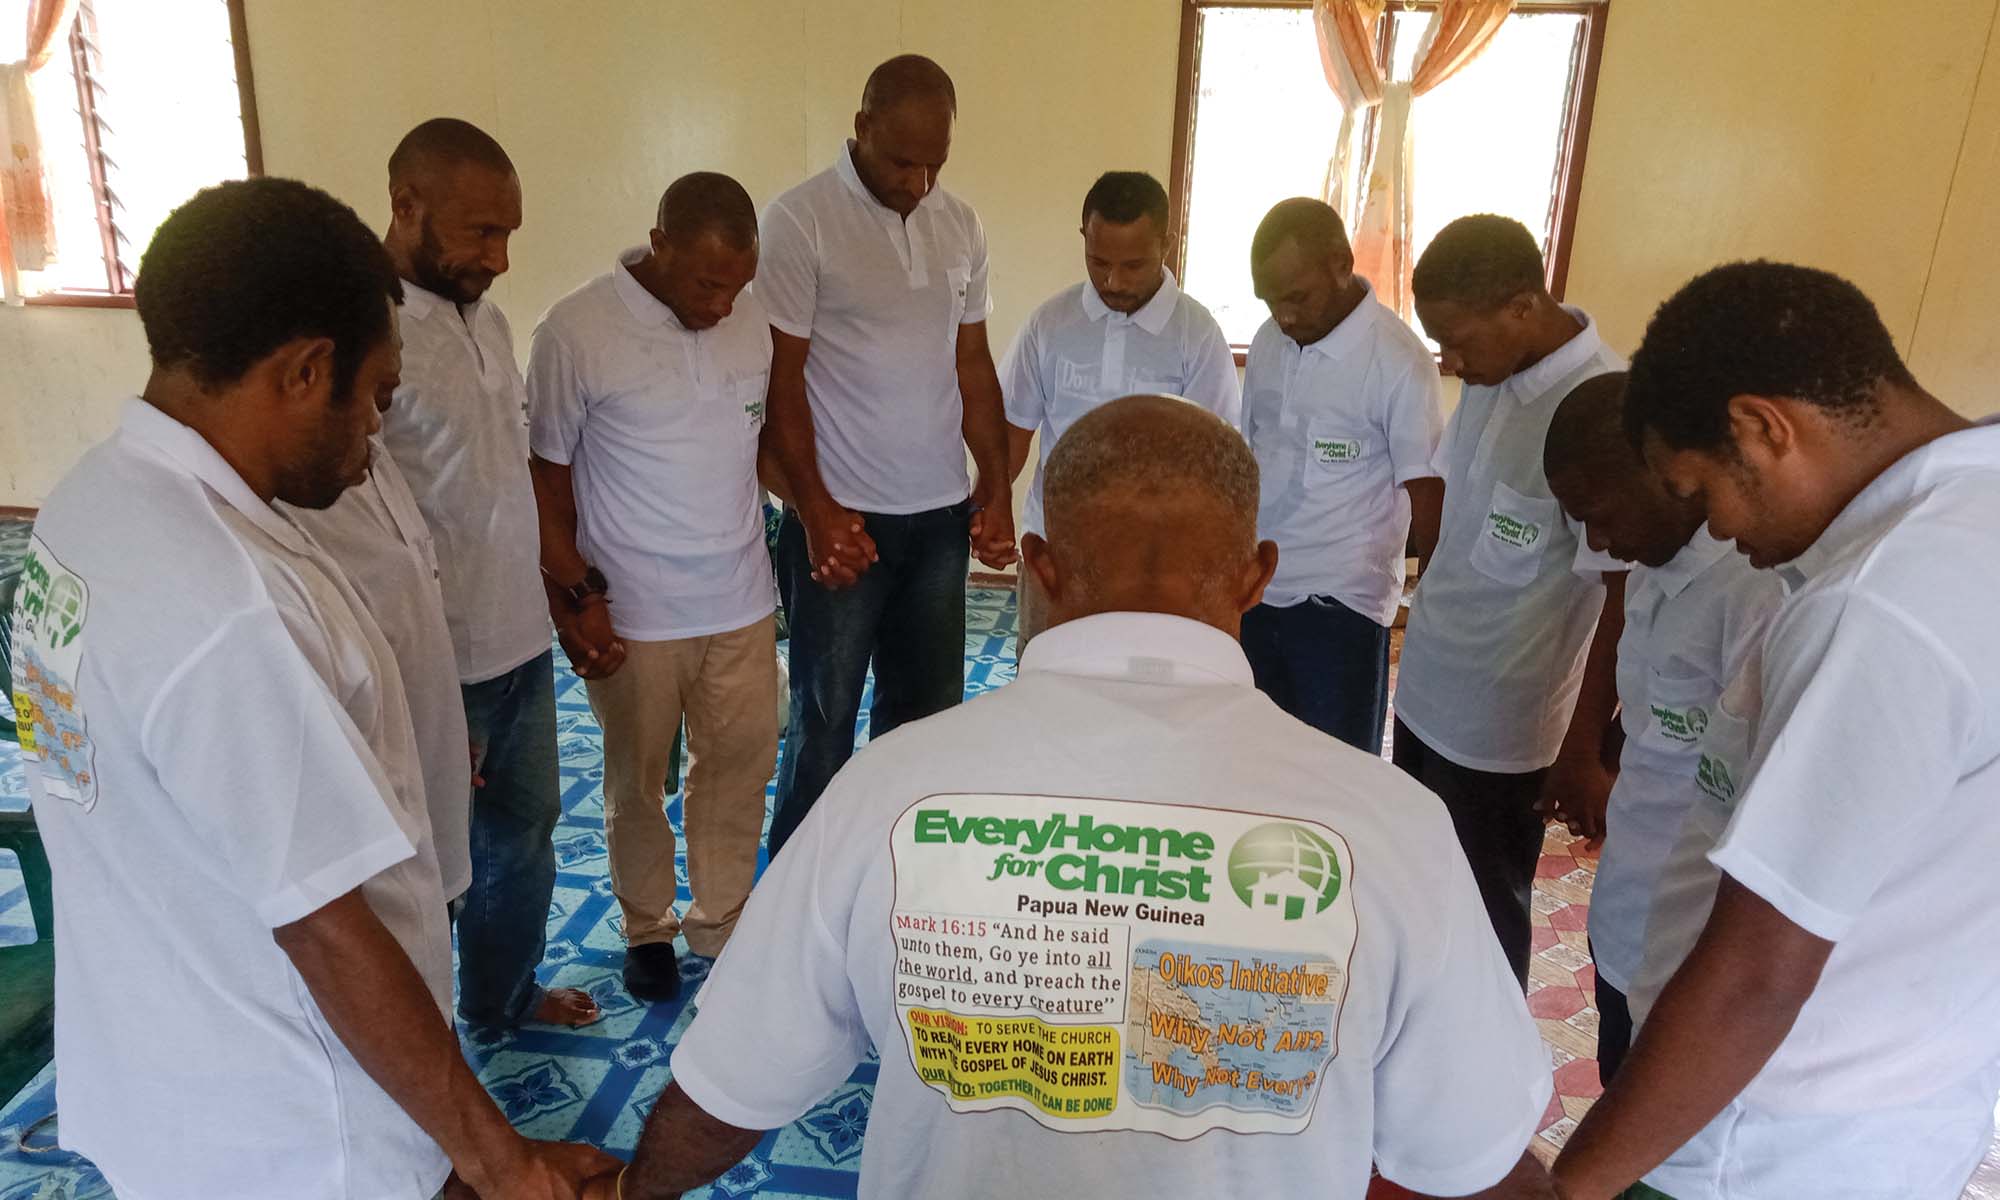 A group of men pray in a circle together